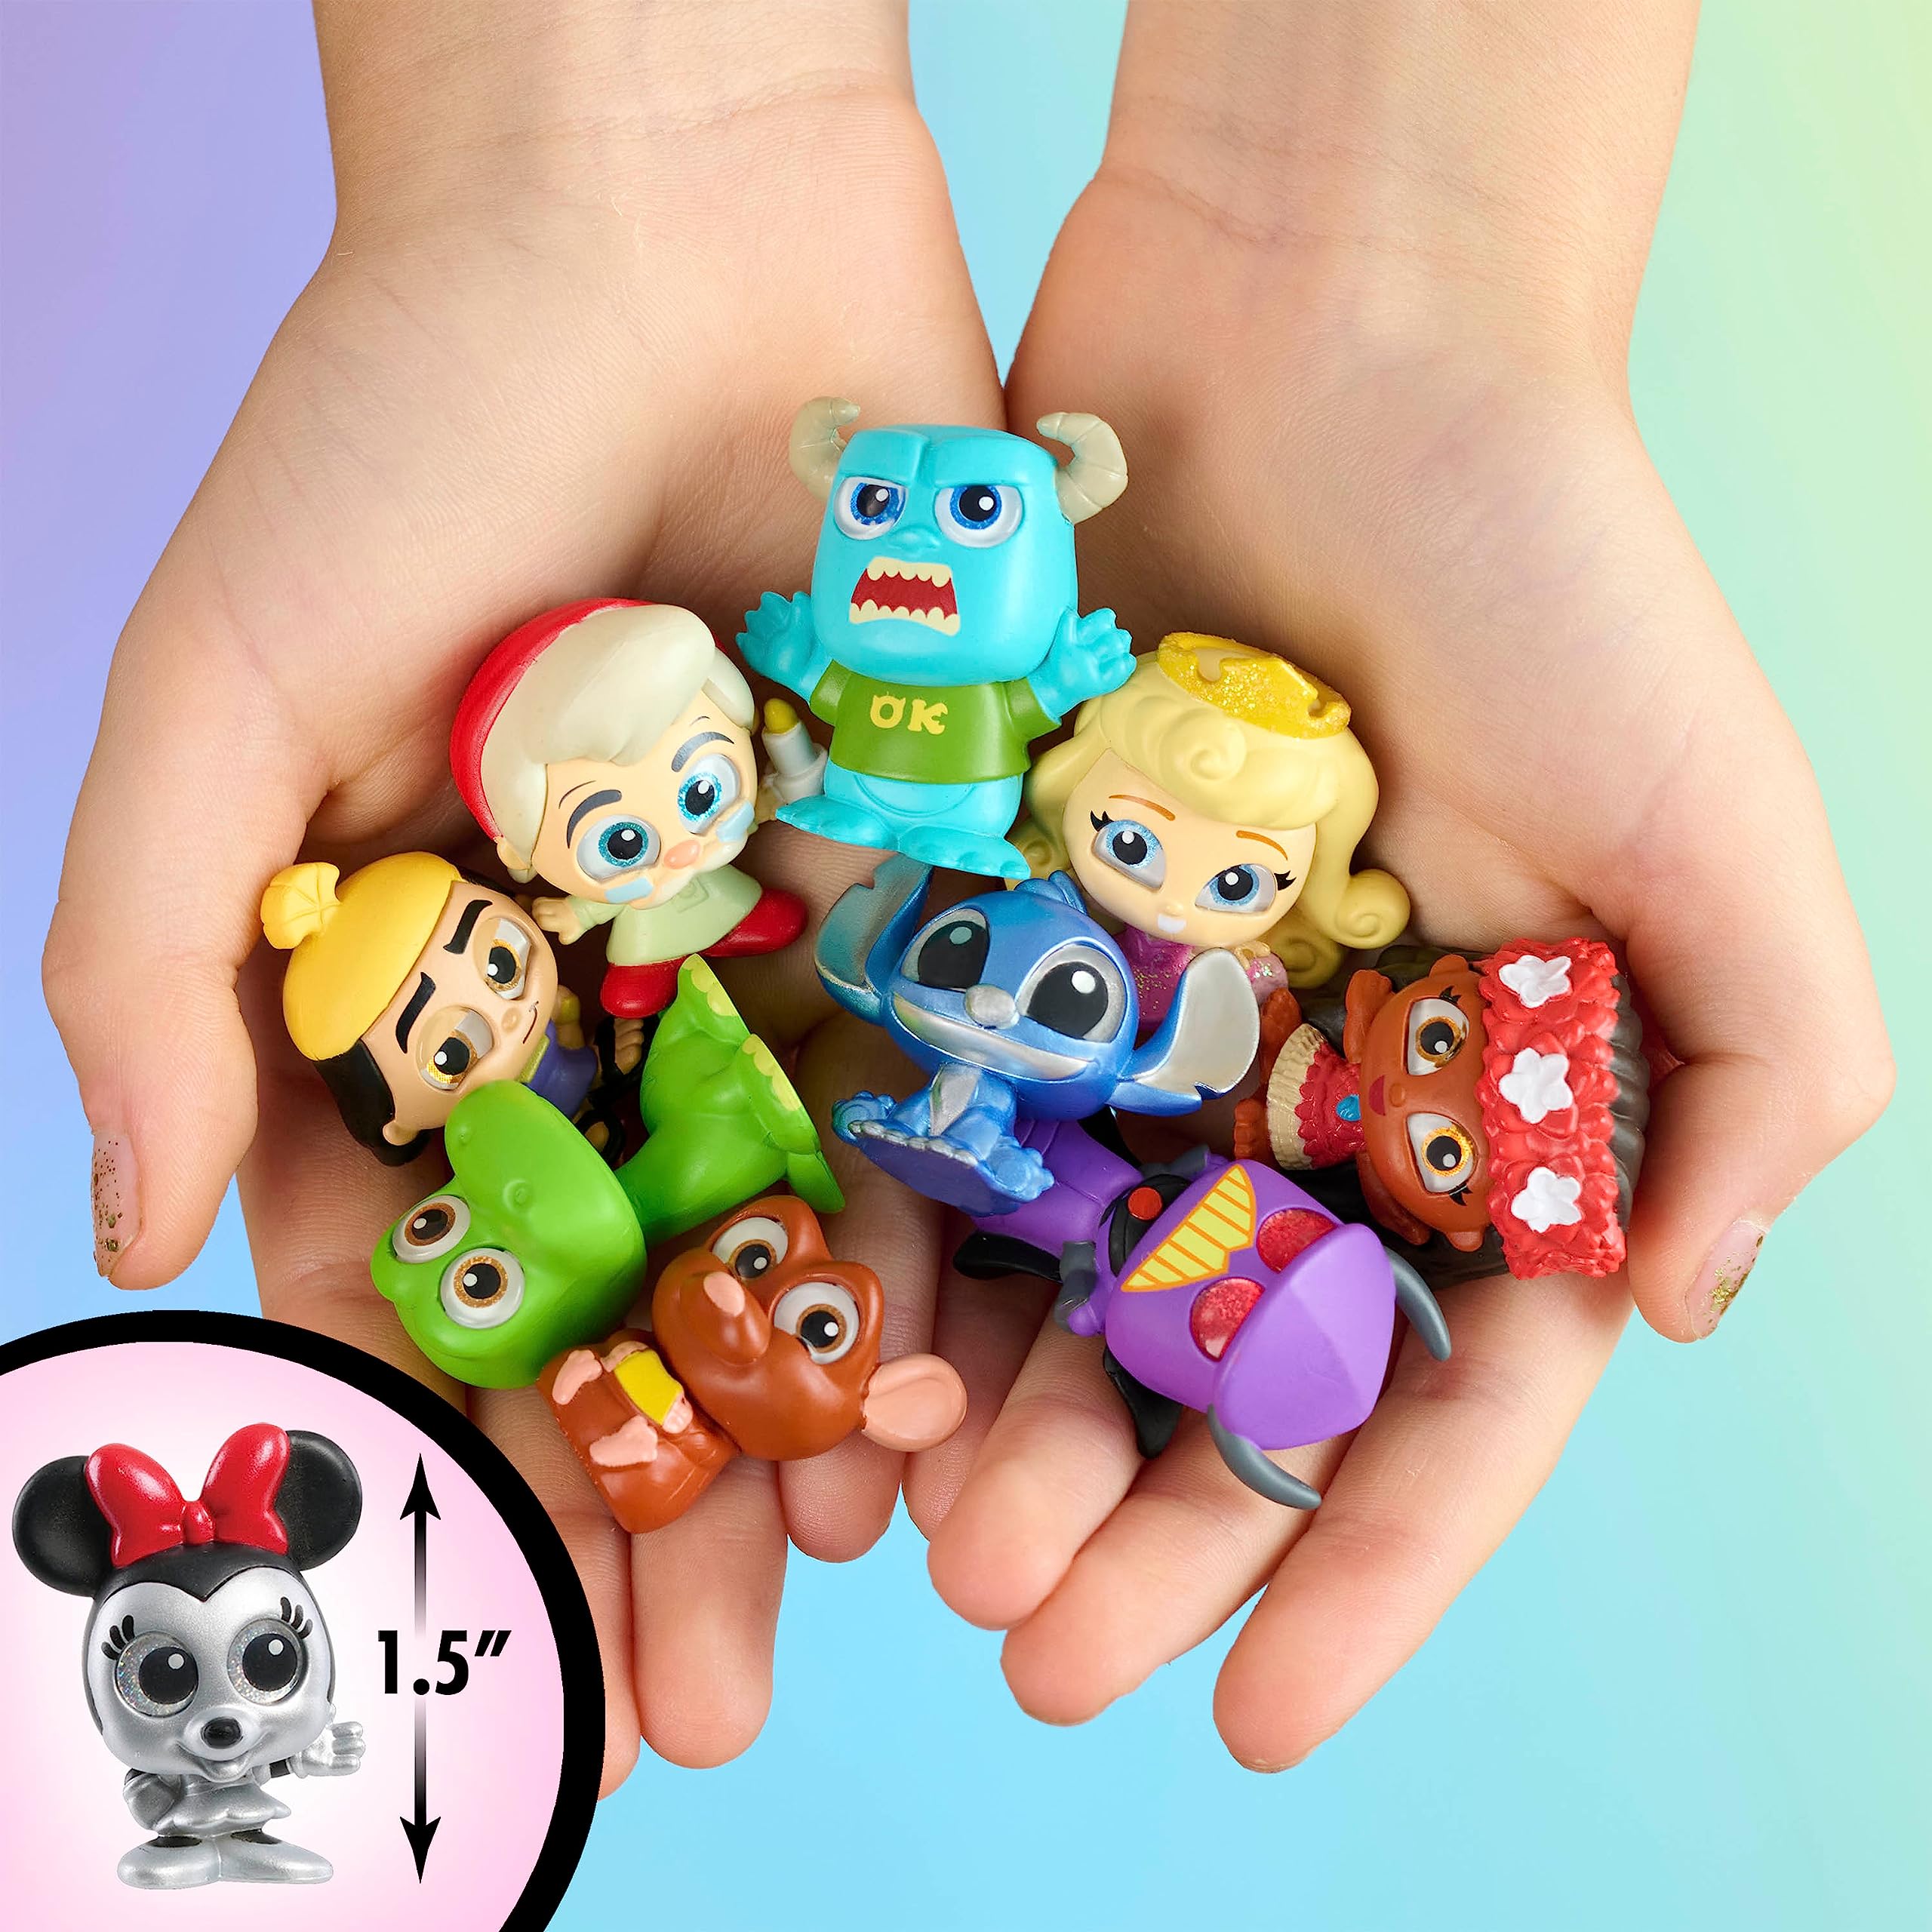 DOORABLES Disney New Multi Peek Series 10, Collectible Blind Bag Figures, Styles May Vary, Officially Licensed Kids Toys for Ages 5 Up, Gifts and Presents by Just Play